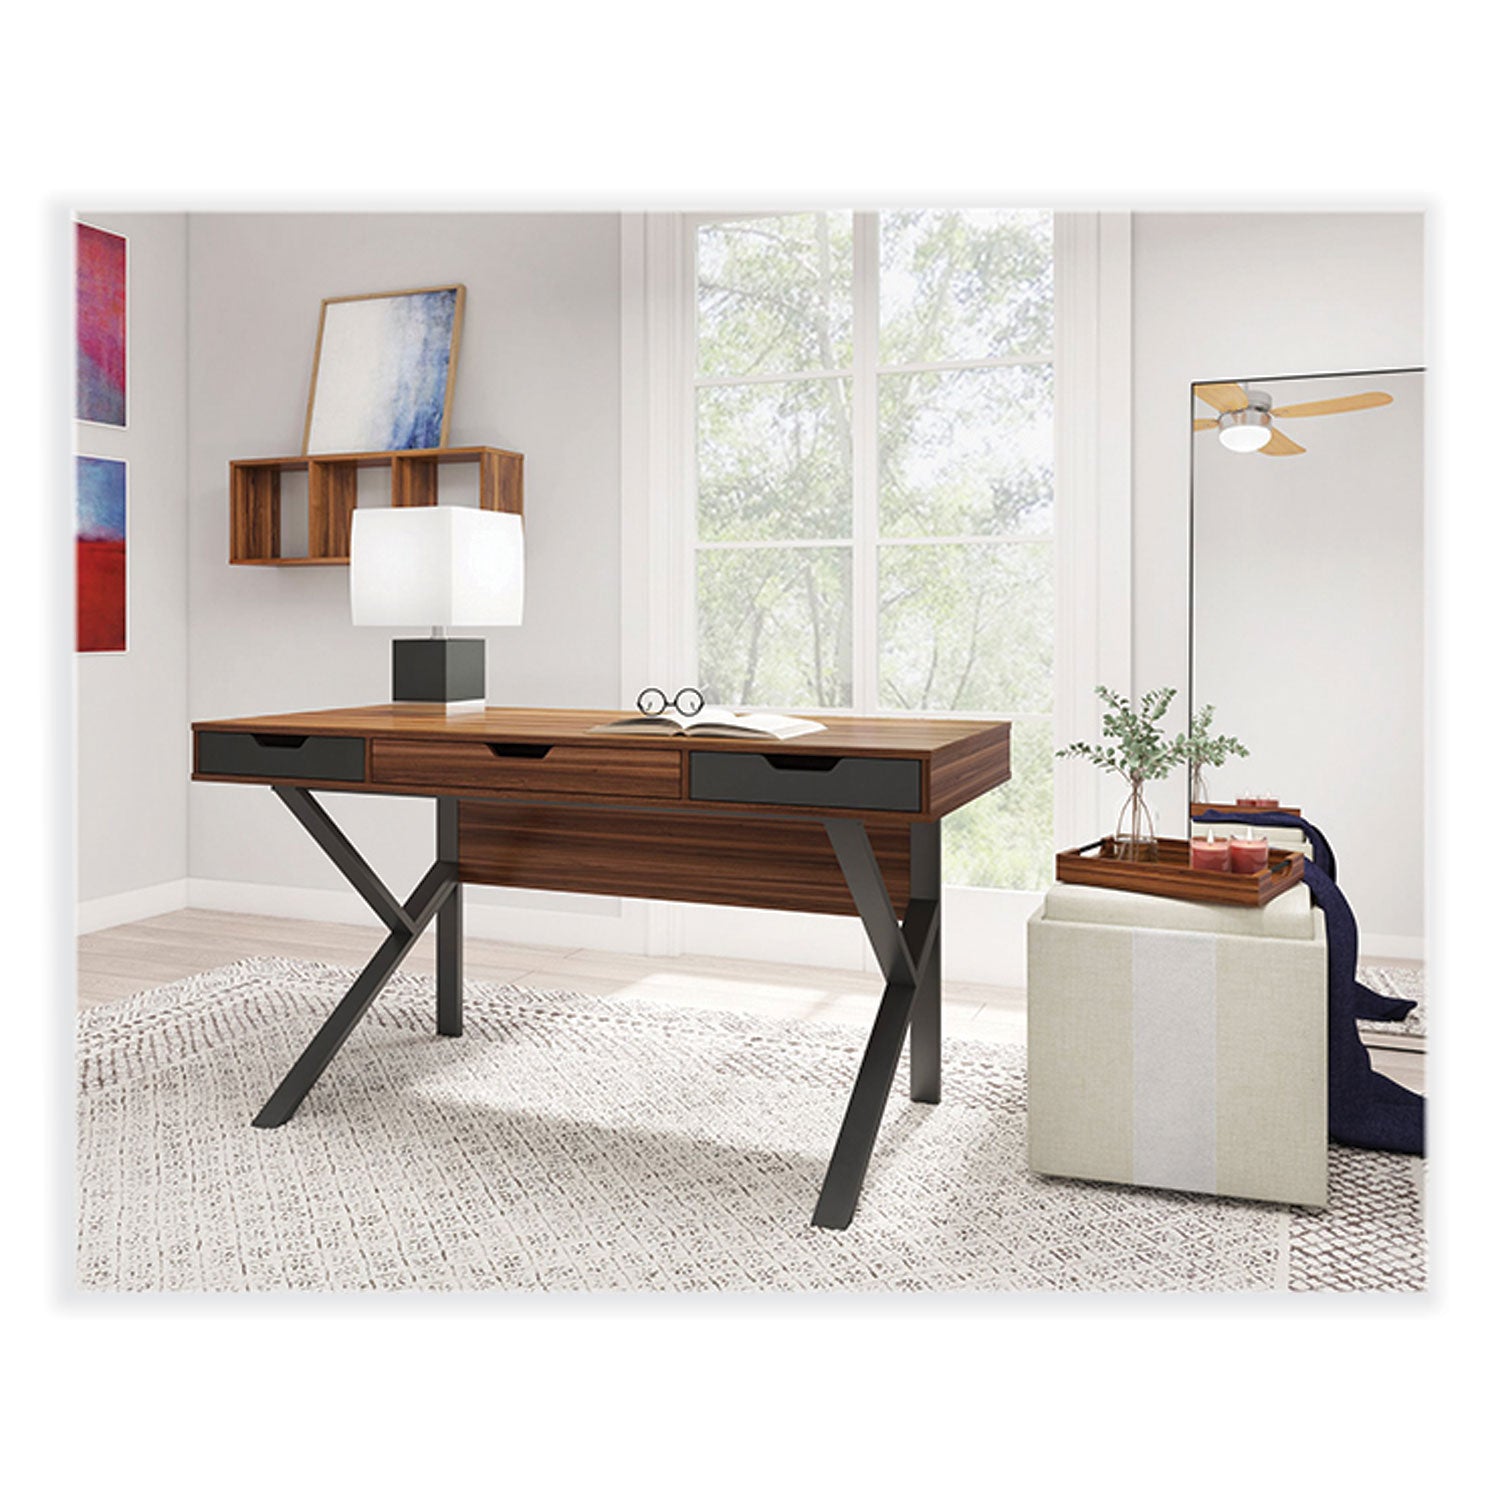 stirling-table-desk-5975-x-2375-x-31-natural-walnut-charcoal-gray_whlst60d - 4